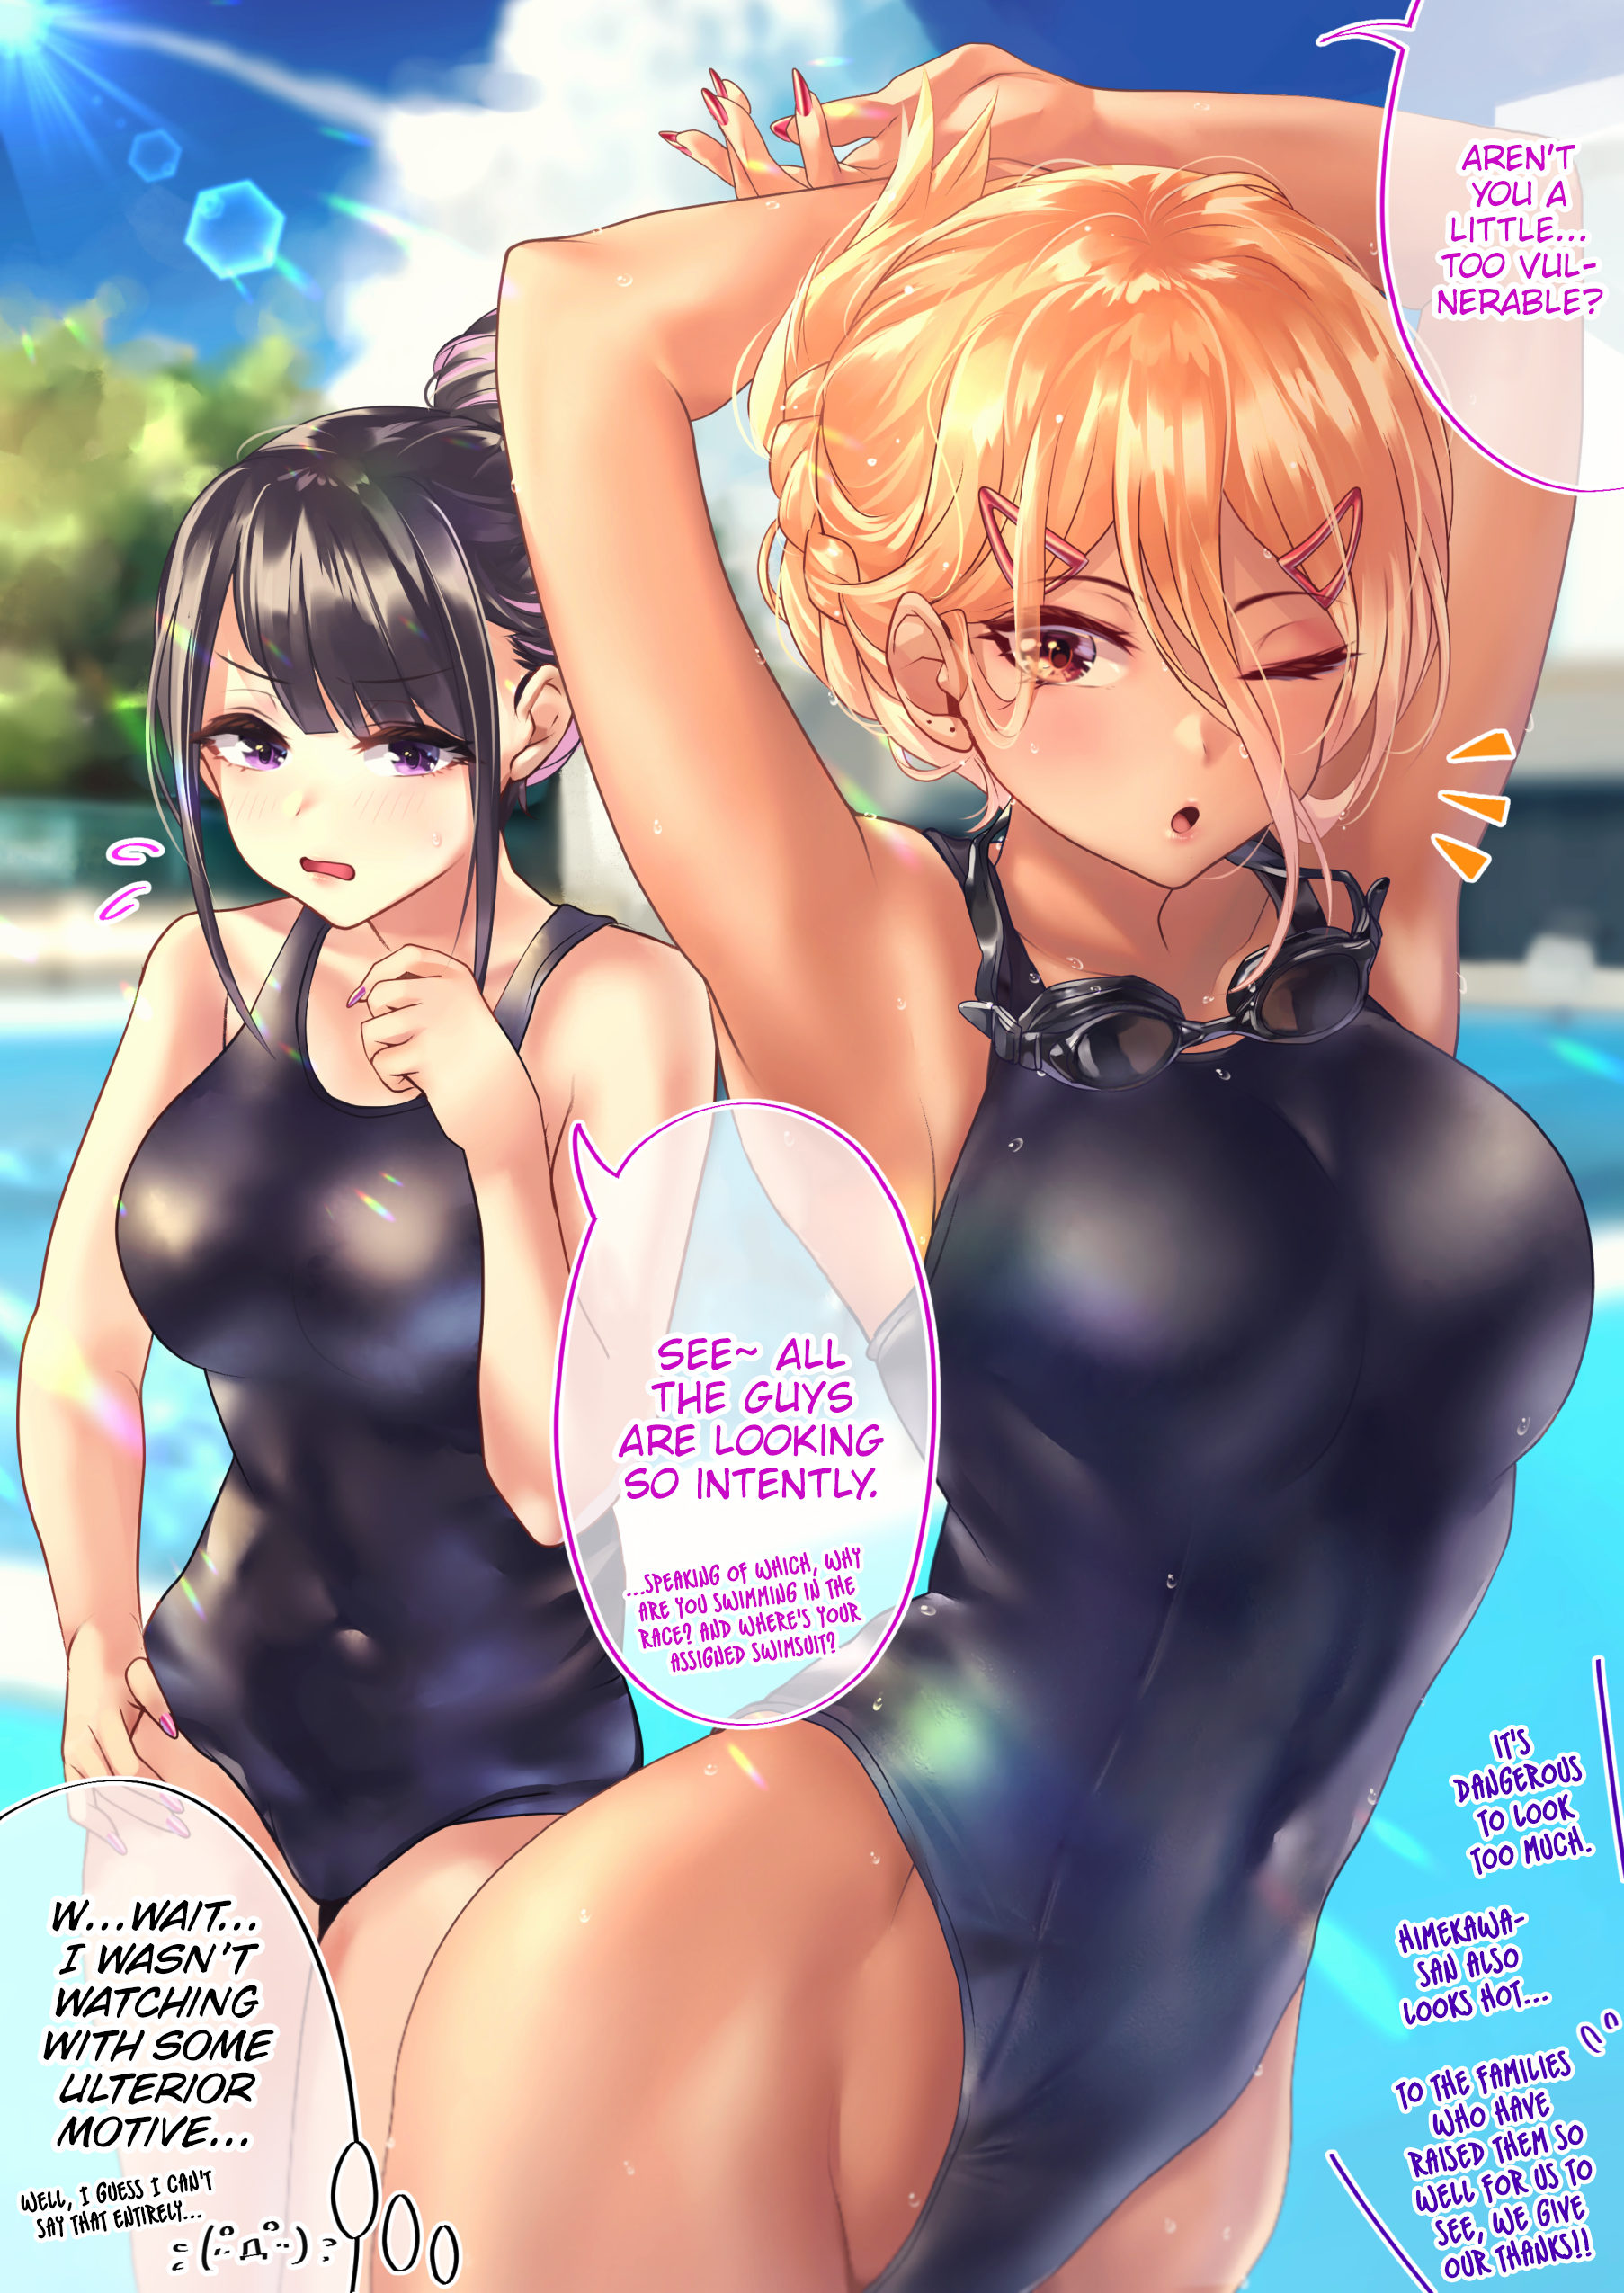 The Story Of An Otaku And A Gyaru Falling In Love - 39 page 2